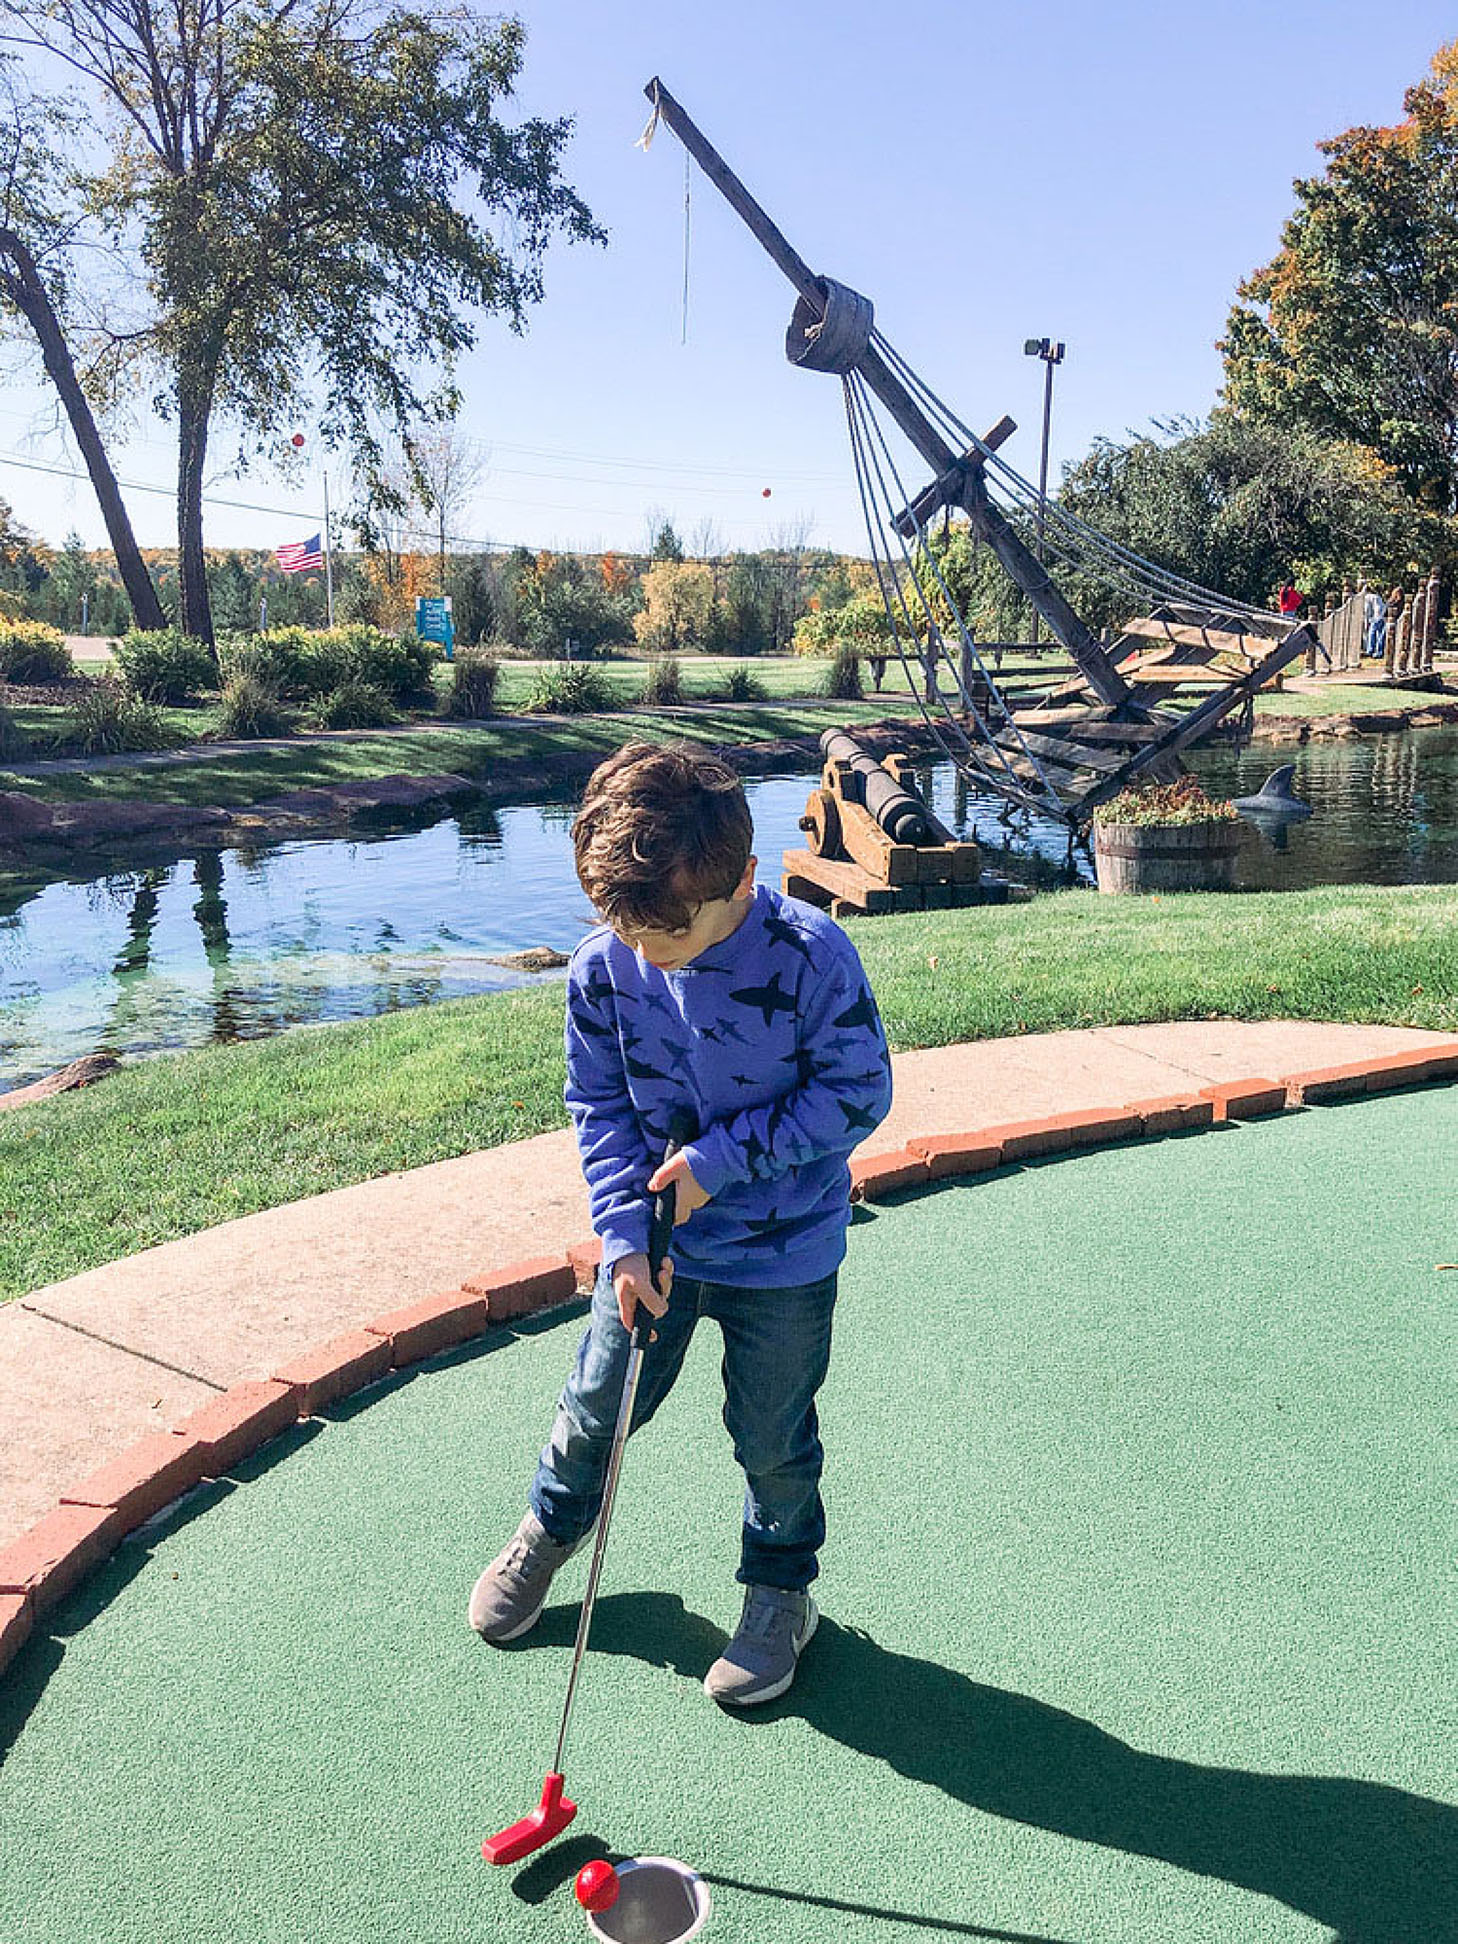 mini golf at Pirate's Cove in Egg Harbor, Door County, WI. Door County Travel Guide